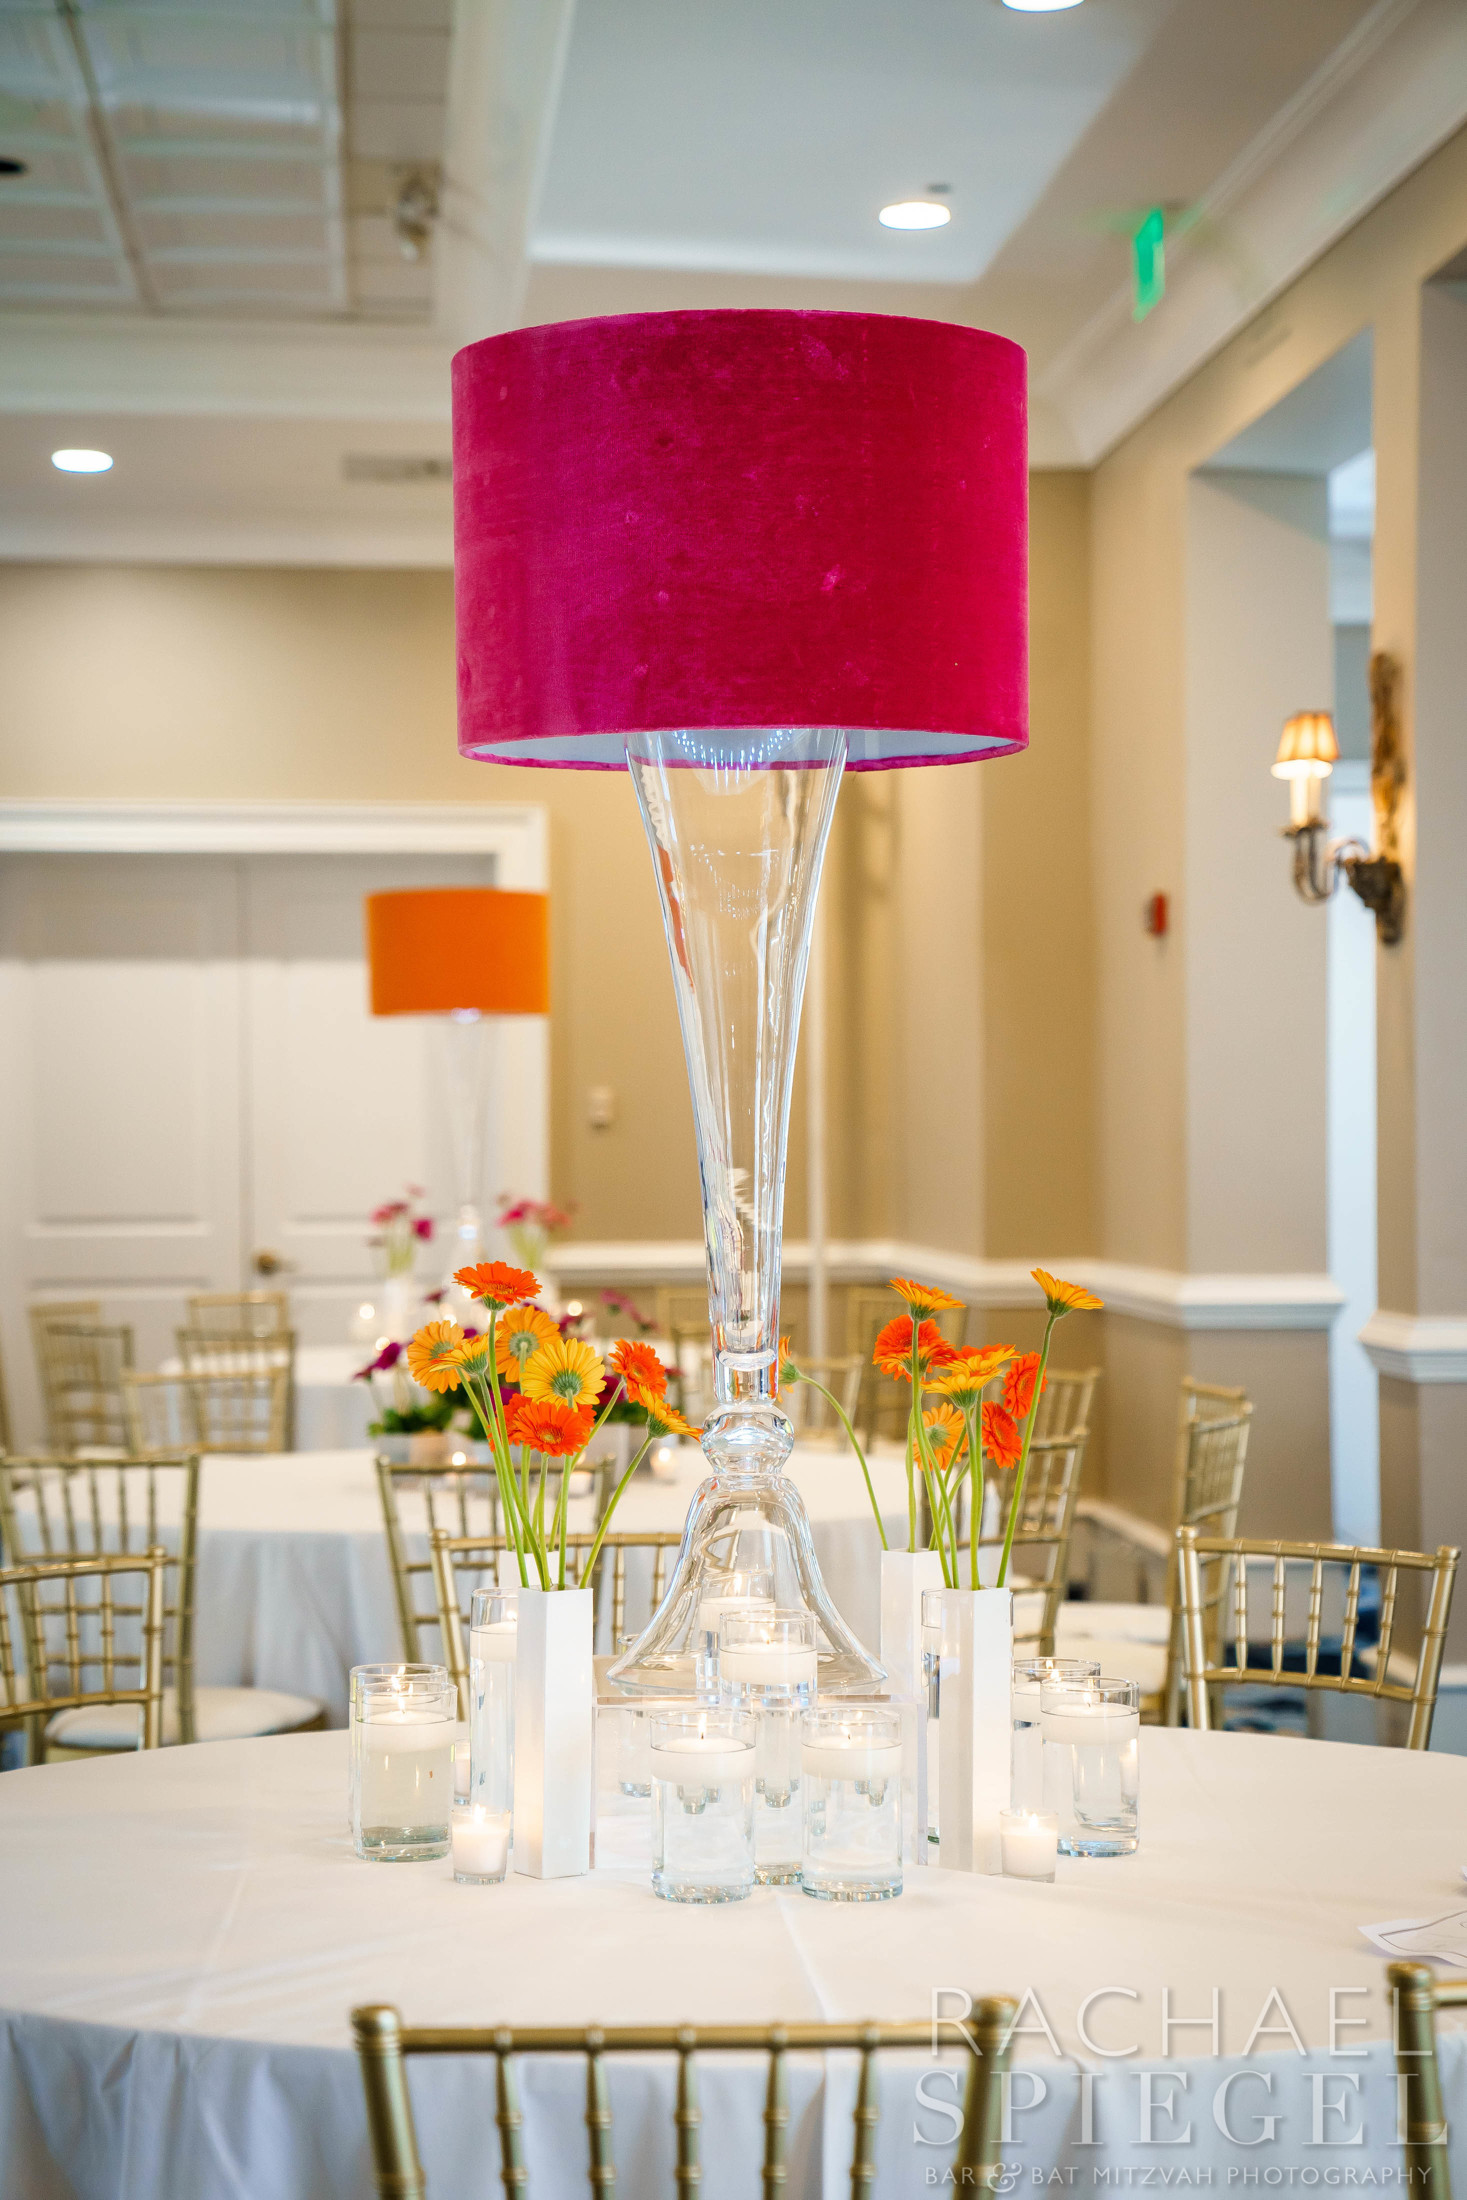 Lampshade centerpieces | Pop Color Events | Adding a Pop of Color to Bar & Bat Mitzvahs in DC, MD & VA | Photo by: Rachael Spiegel